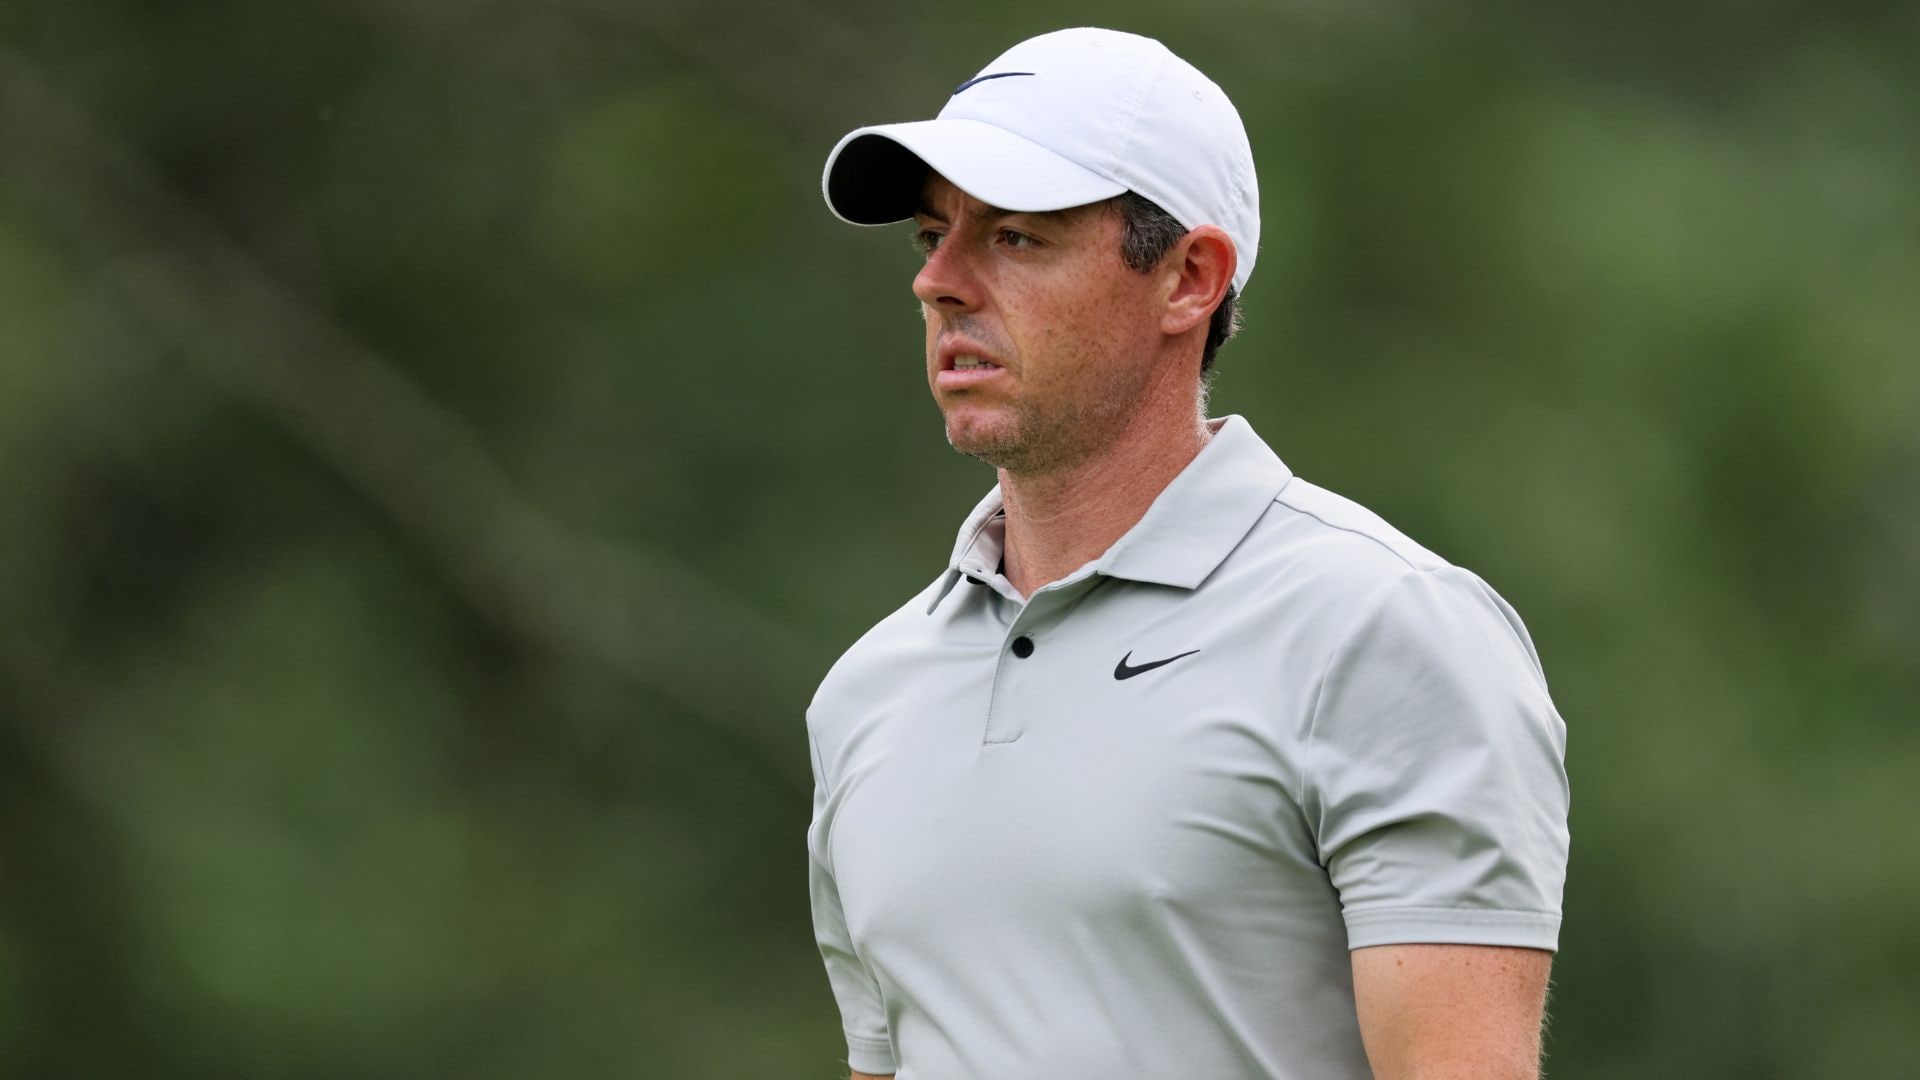 Rory McIlroy takes swipe at Phil Mickelson in wake of Ryder Cup betting allegation